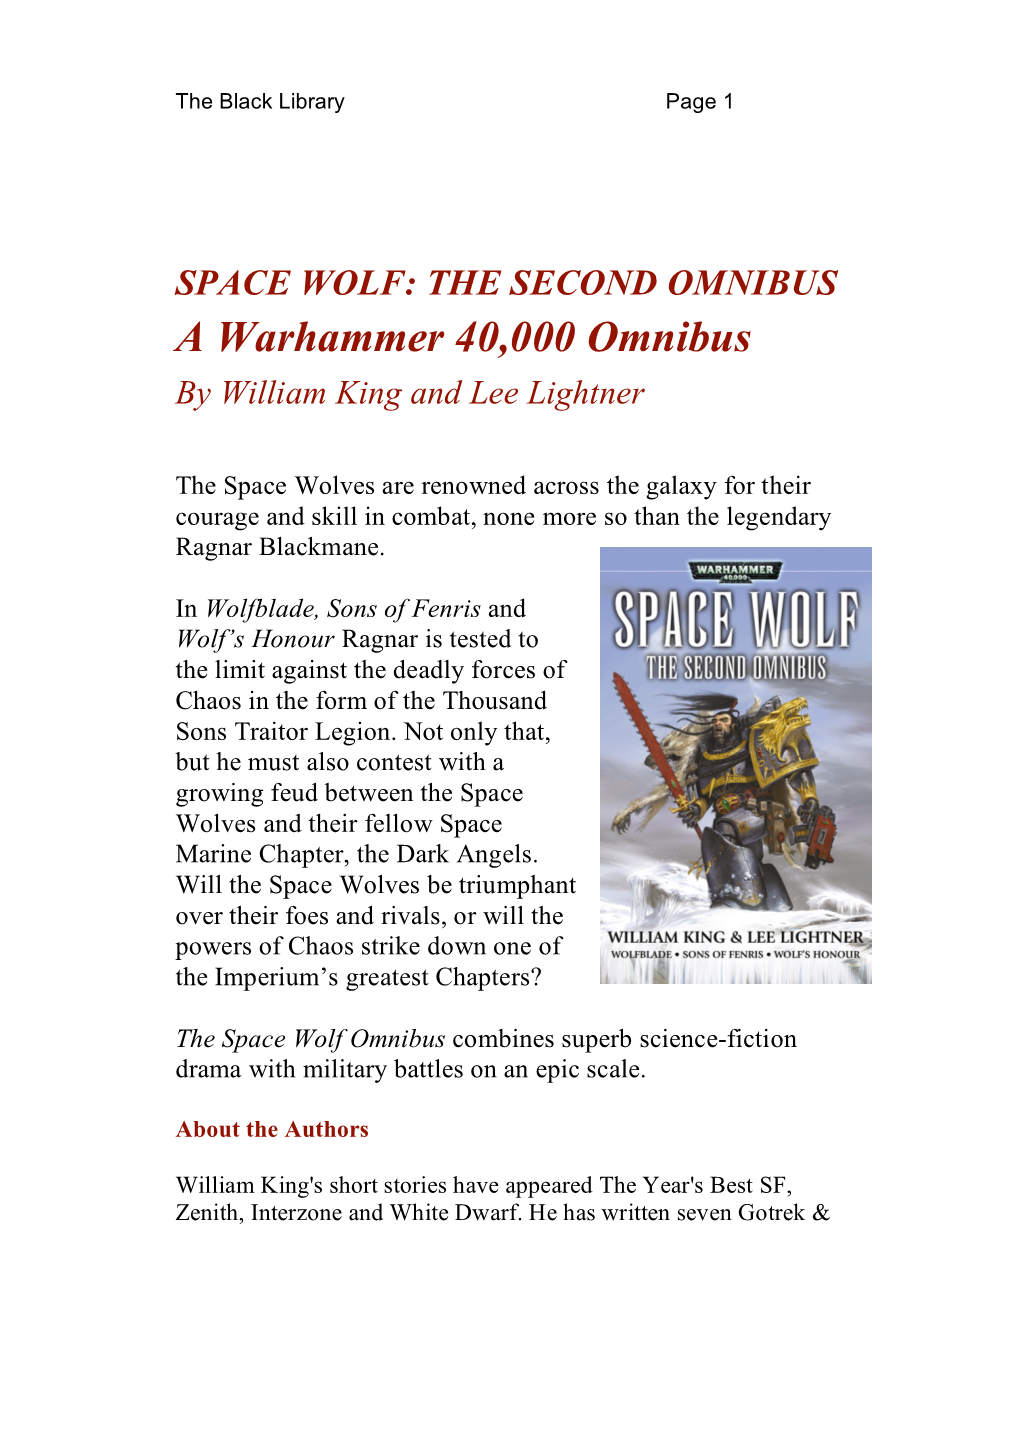 SPACE WOLF: the SECOND OMNIBUS a Warhammer 40,000 Omnibus by William King and Lee Lightner